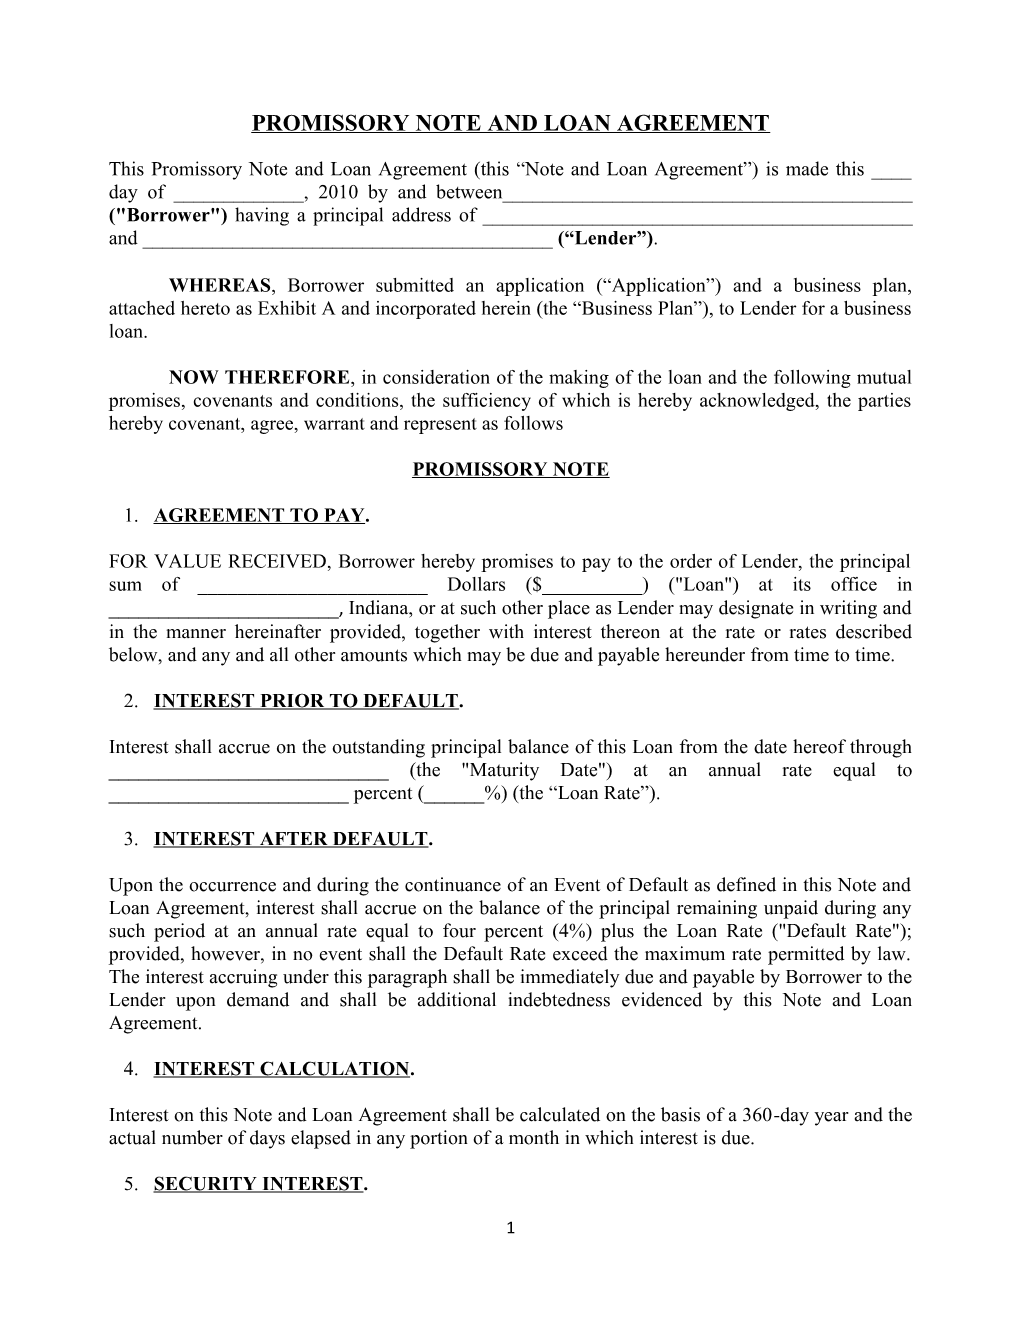 Promissory Note and Loan Agreement